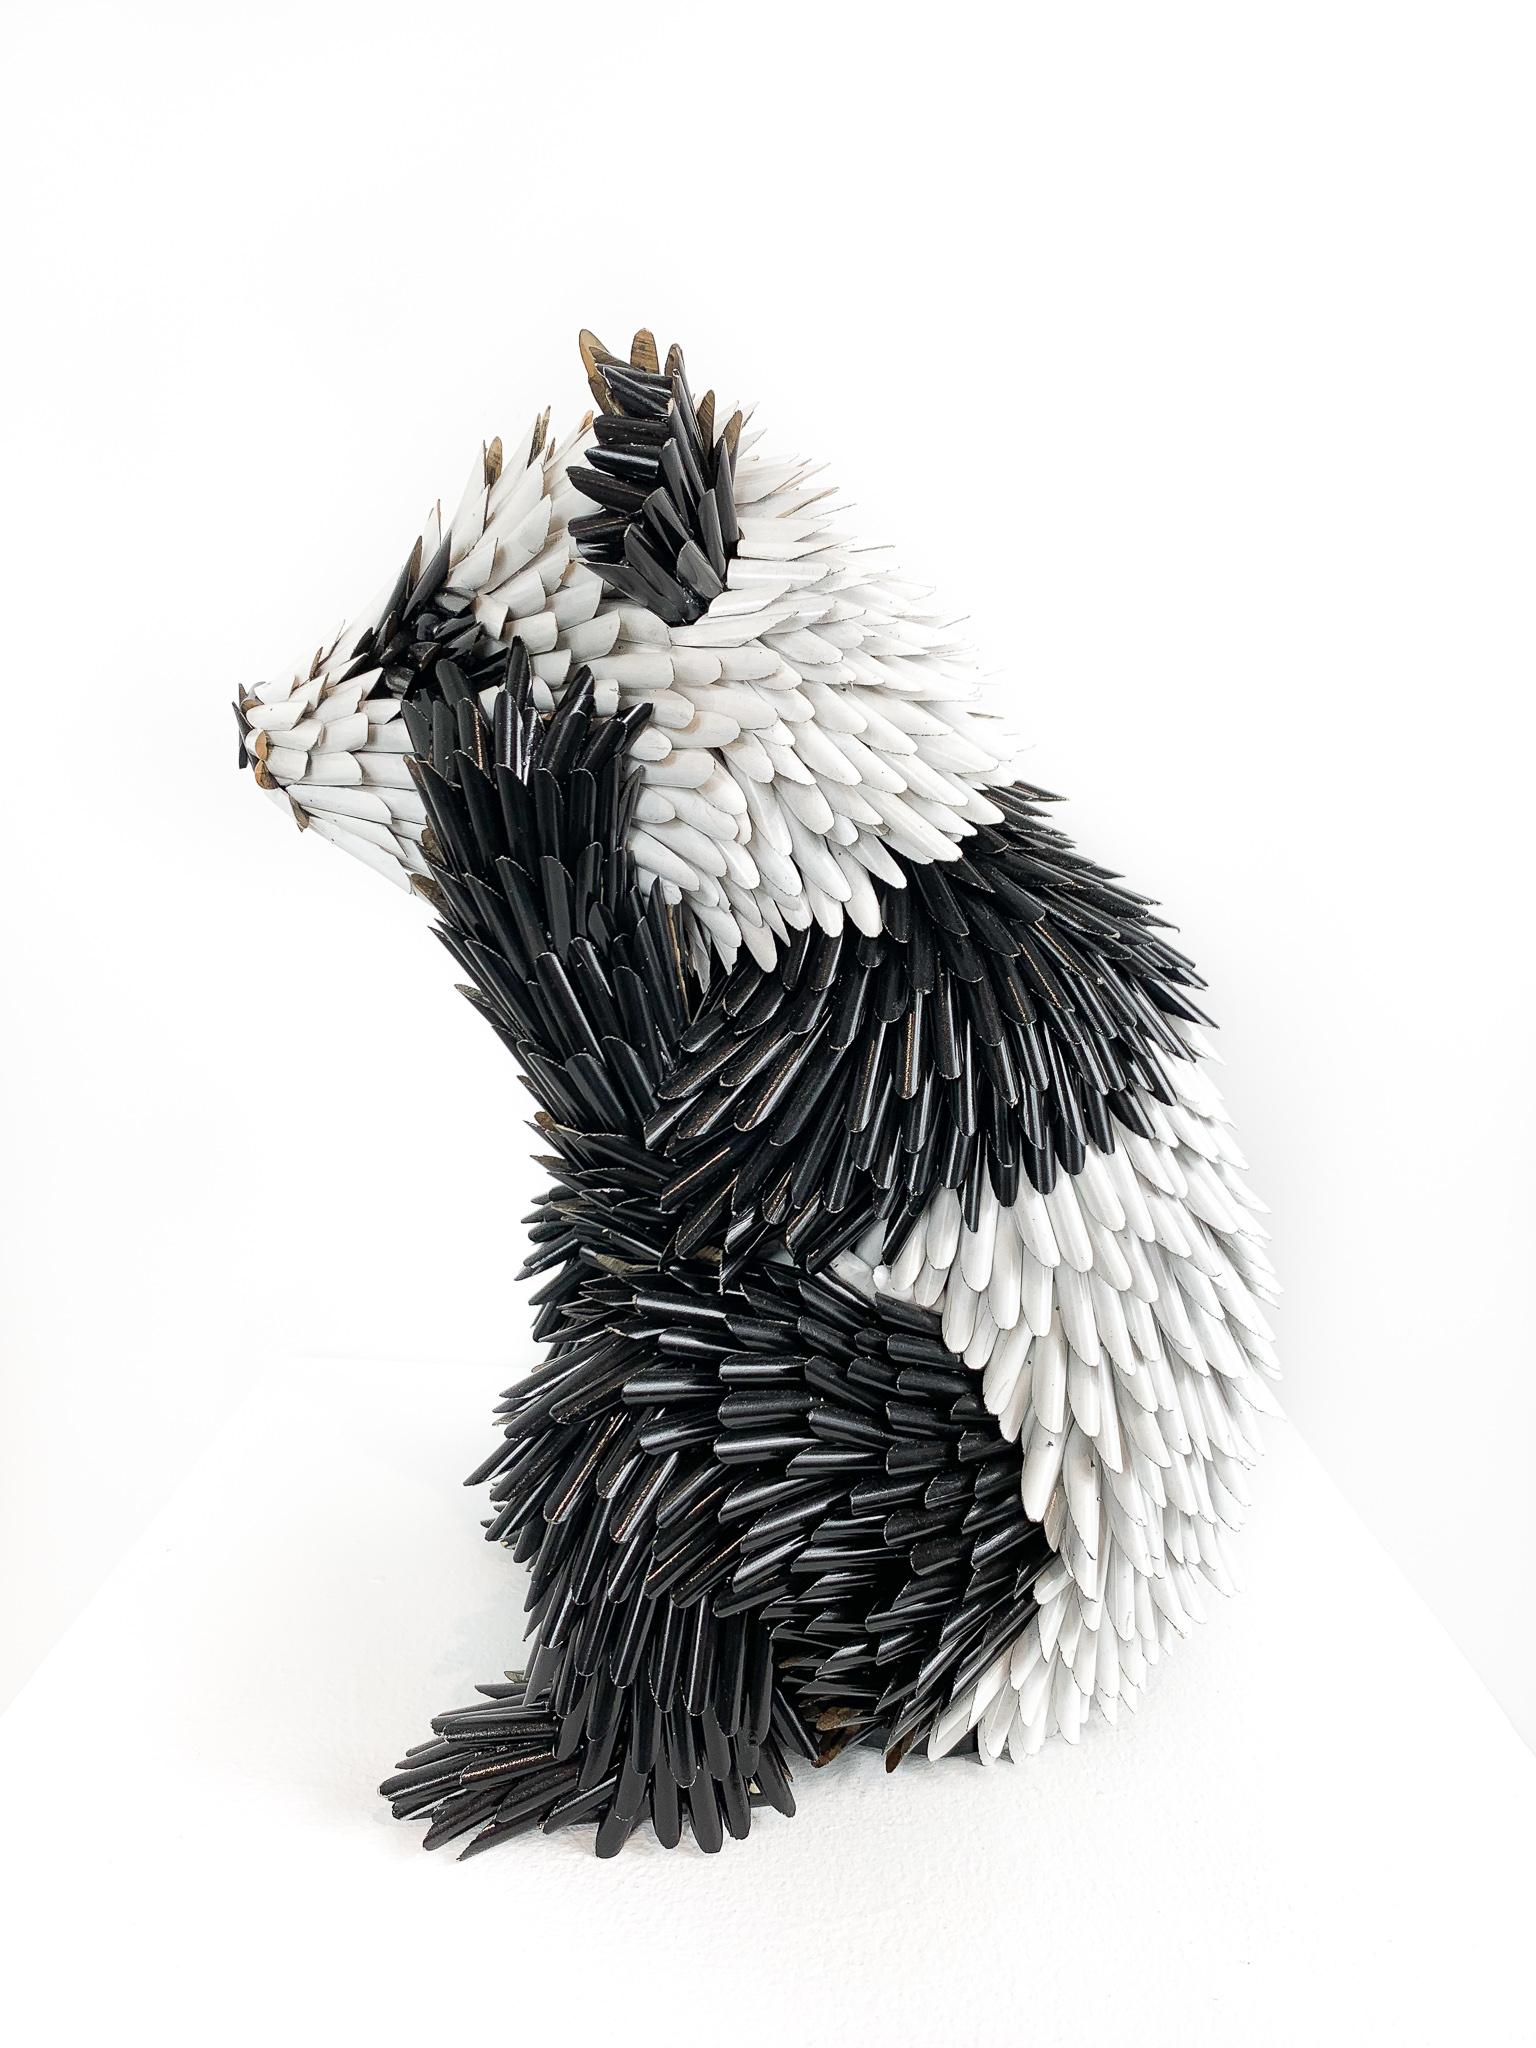 Baby Panda - Contemporary Sculpture by Federico Uribe